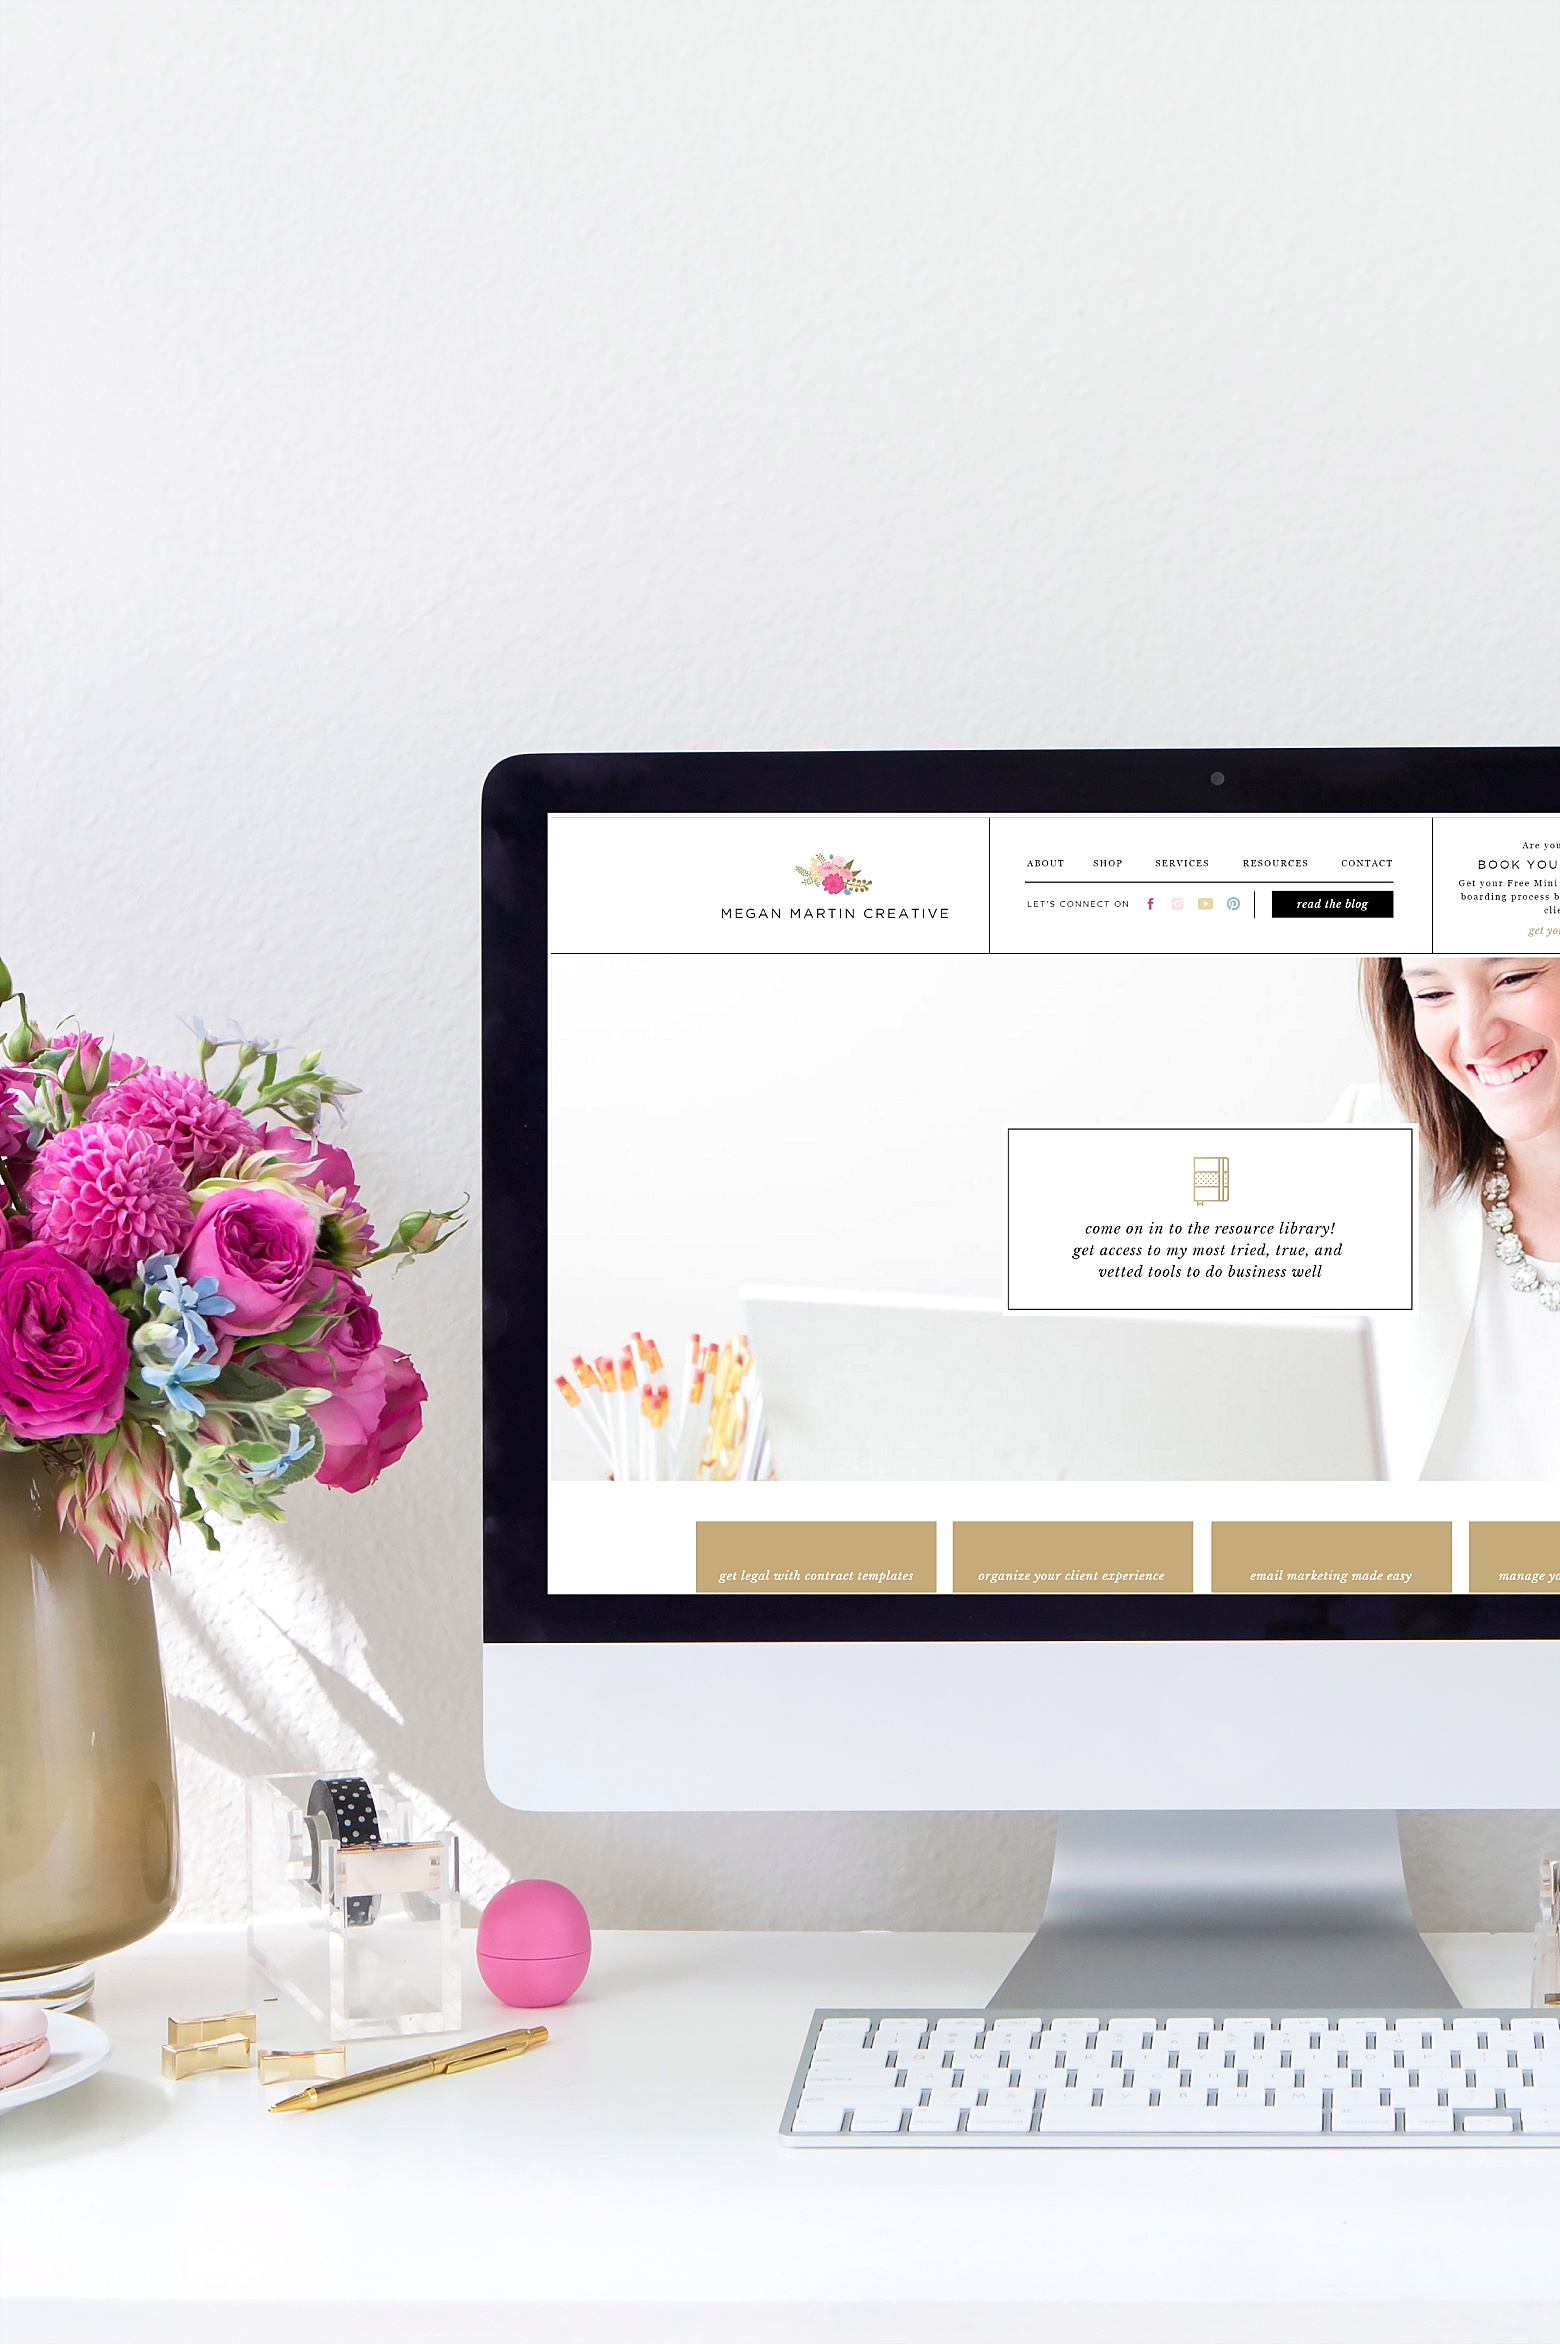 Resources Page, Showit 5 website, creative entrepreneur, how to organize and complete your new website on Megan Martin Creative